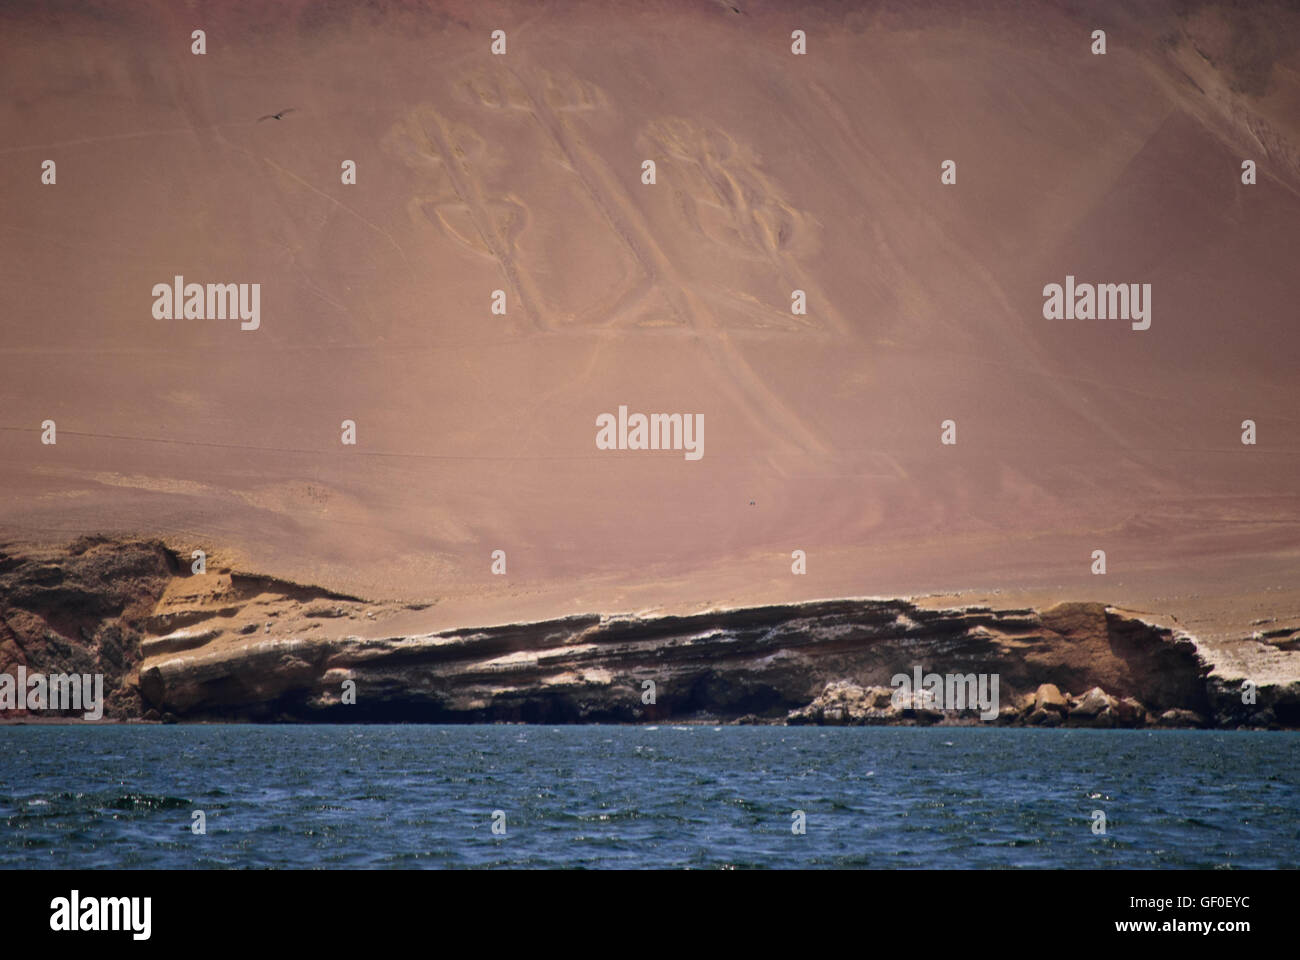 The Paracas Candelabra on the desert mountain of the Andes Stock Photo